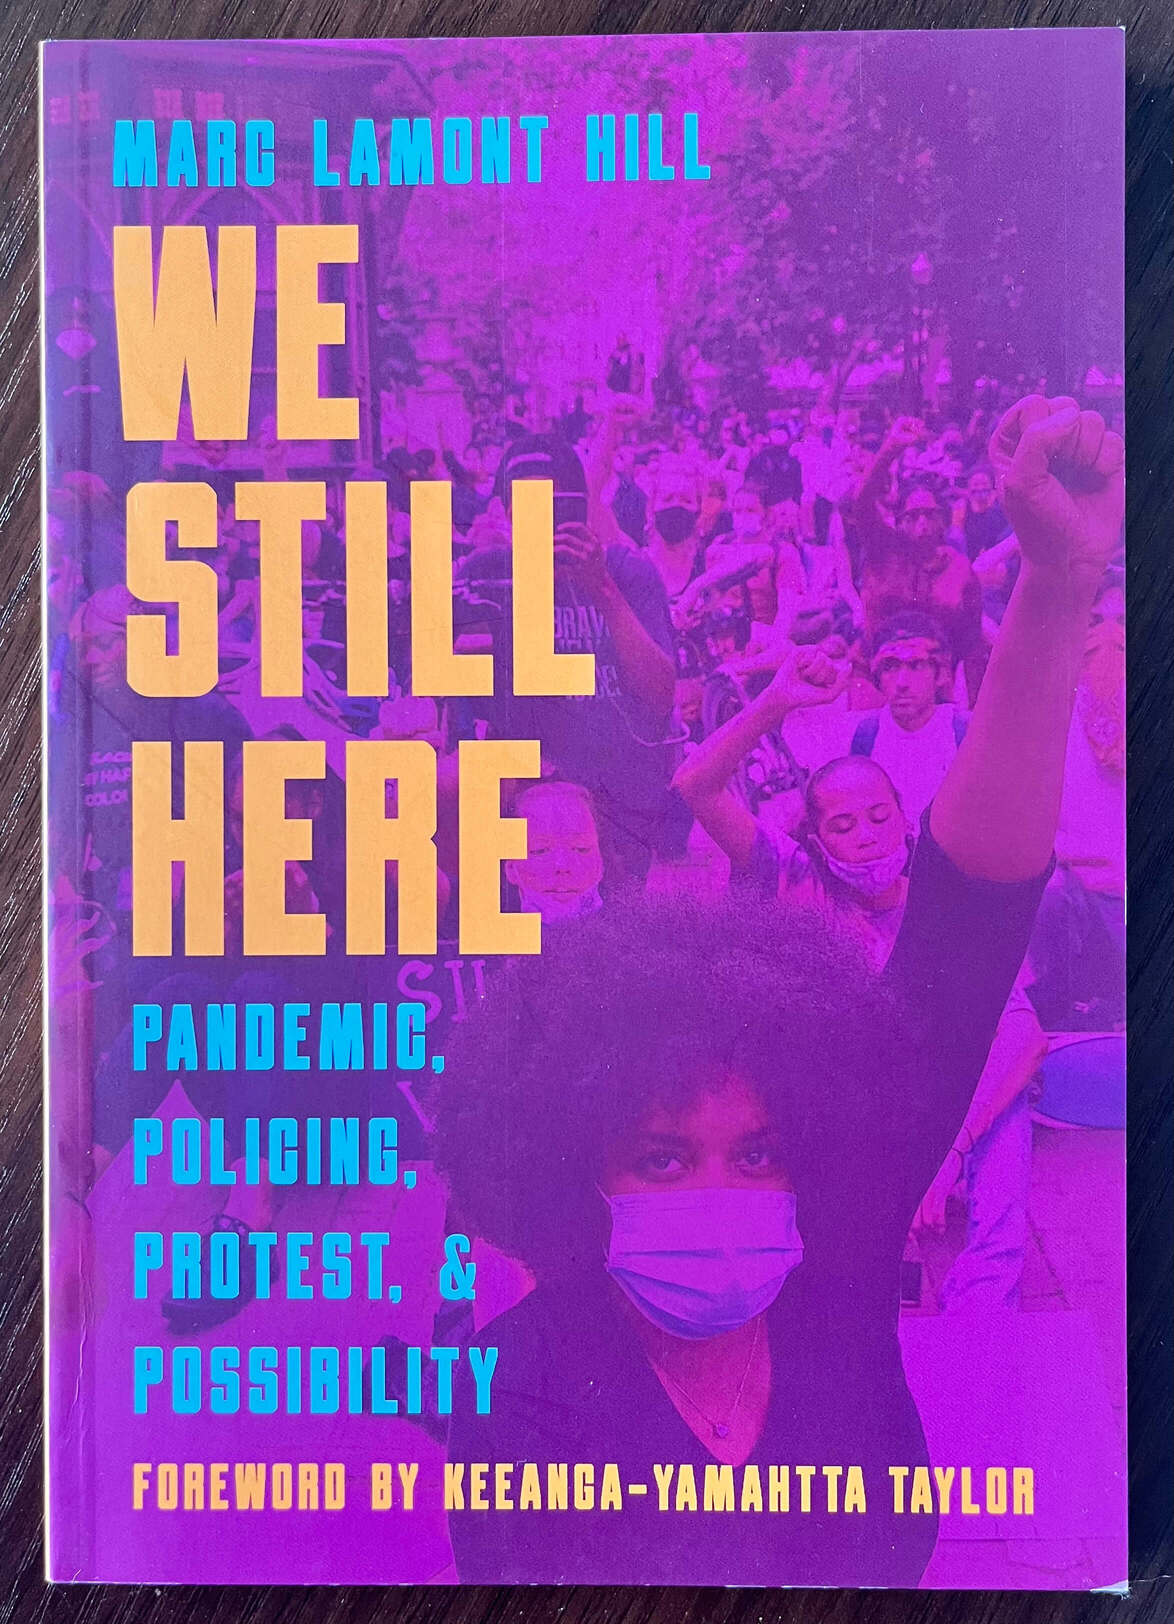 “We Still Here: Pandemic, Policing, Protest, & Possibility” by Marc Lamont Hill. Foreword by Keeanga-Yamahtta Taylor.